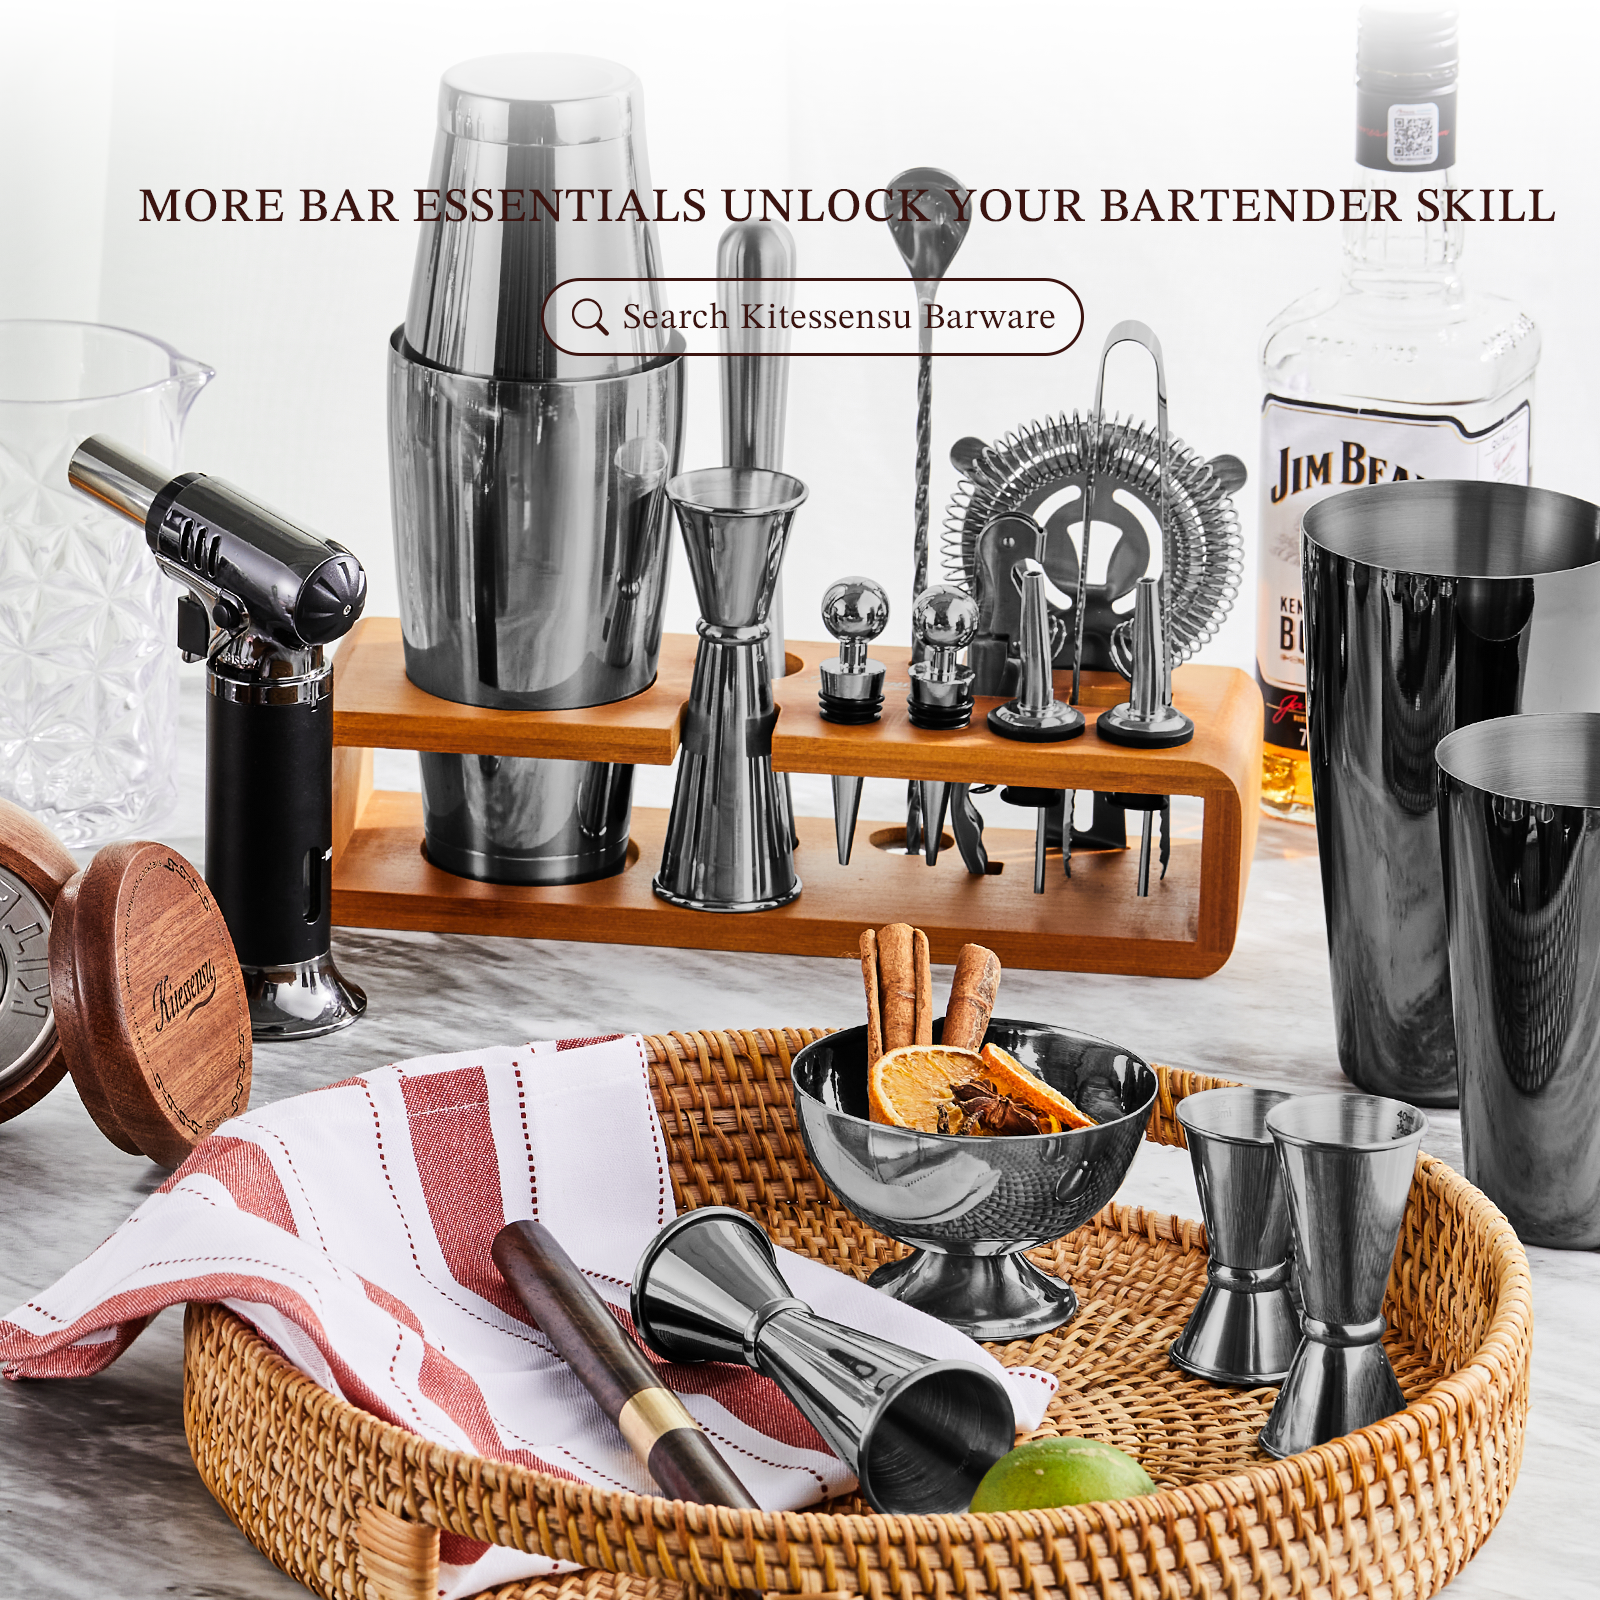 KITESSENSU Bartender Kit, 15-Piece Cocktail Shaker Set with Stand, Drink Mixer Set, Bar Set with All Essential Bar Accessory Tools |Black - image 5 of 8